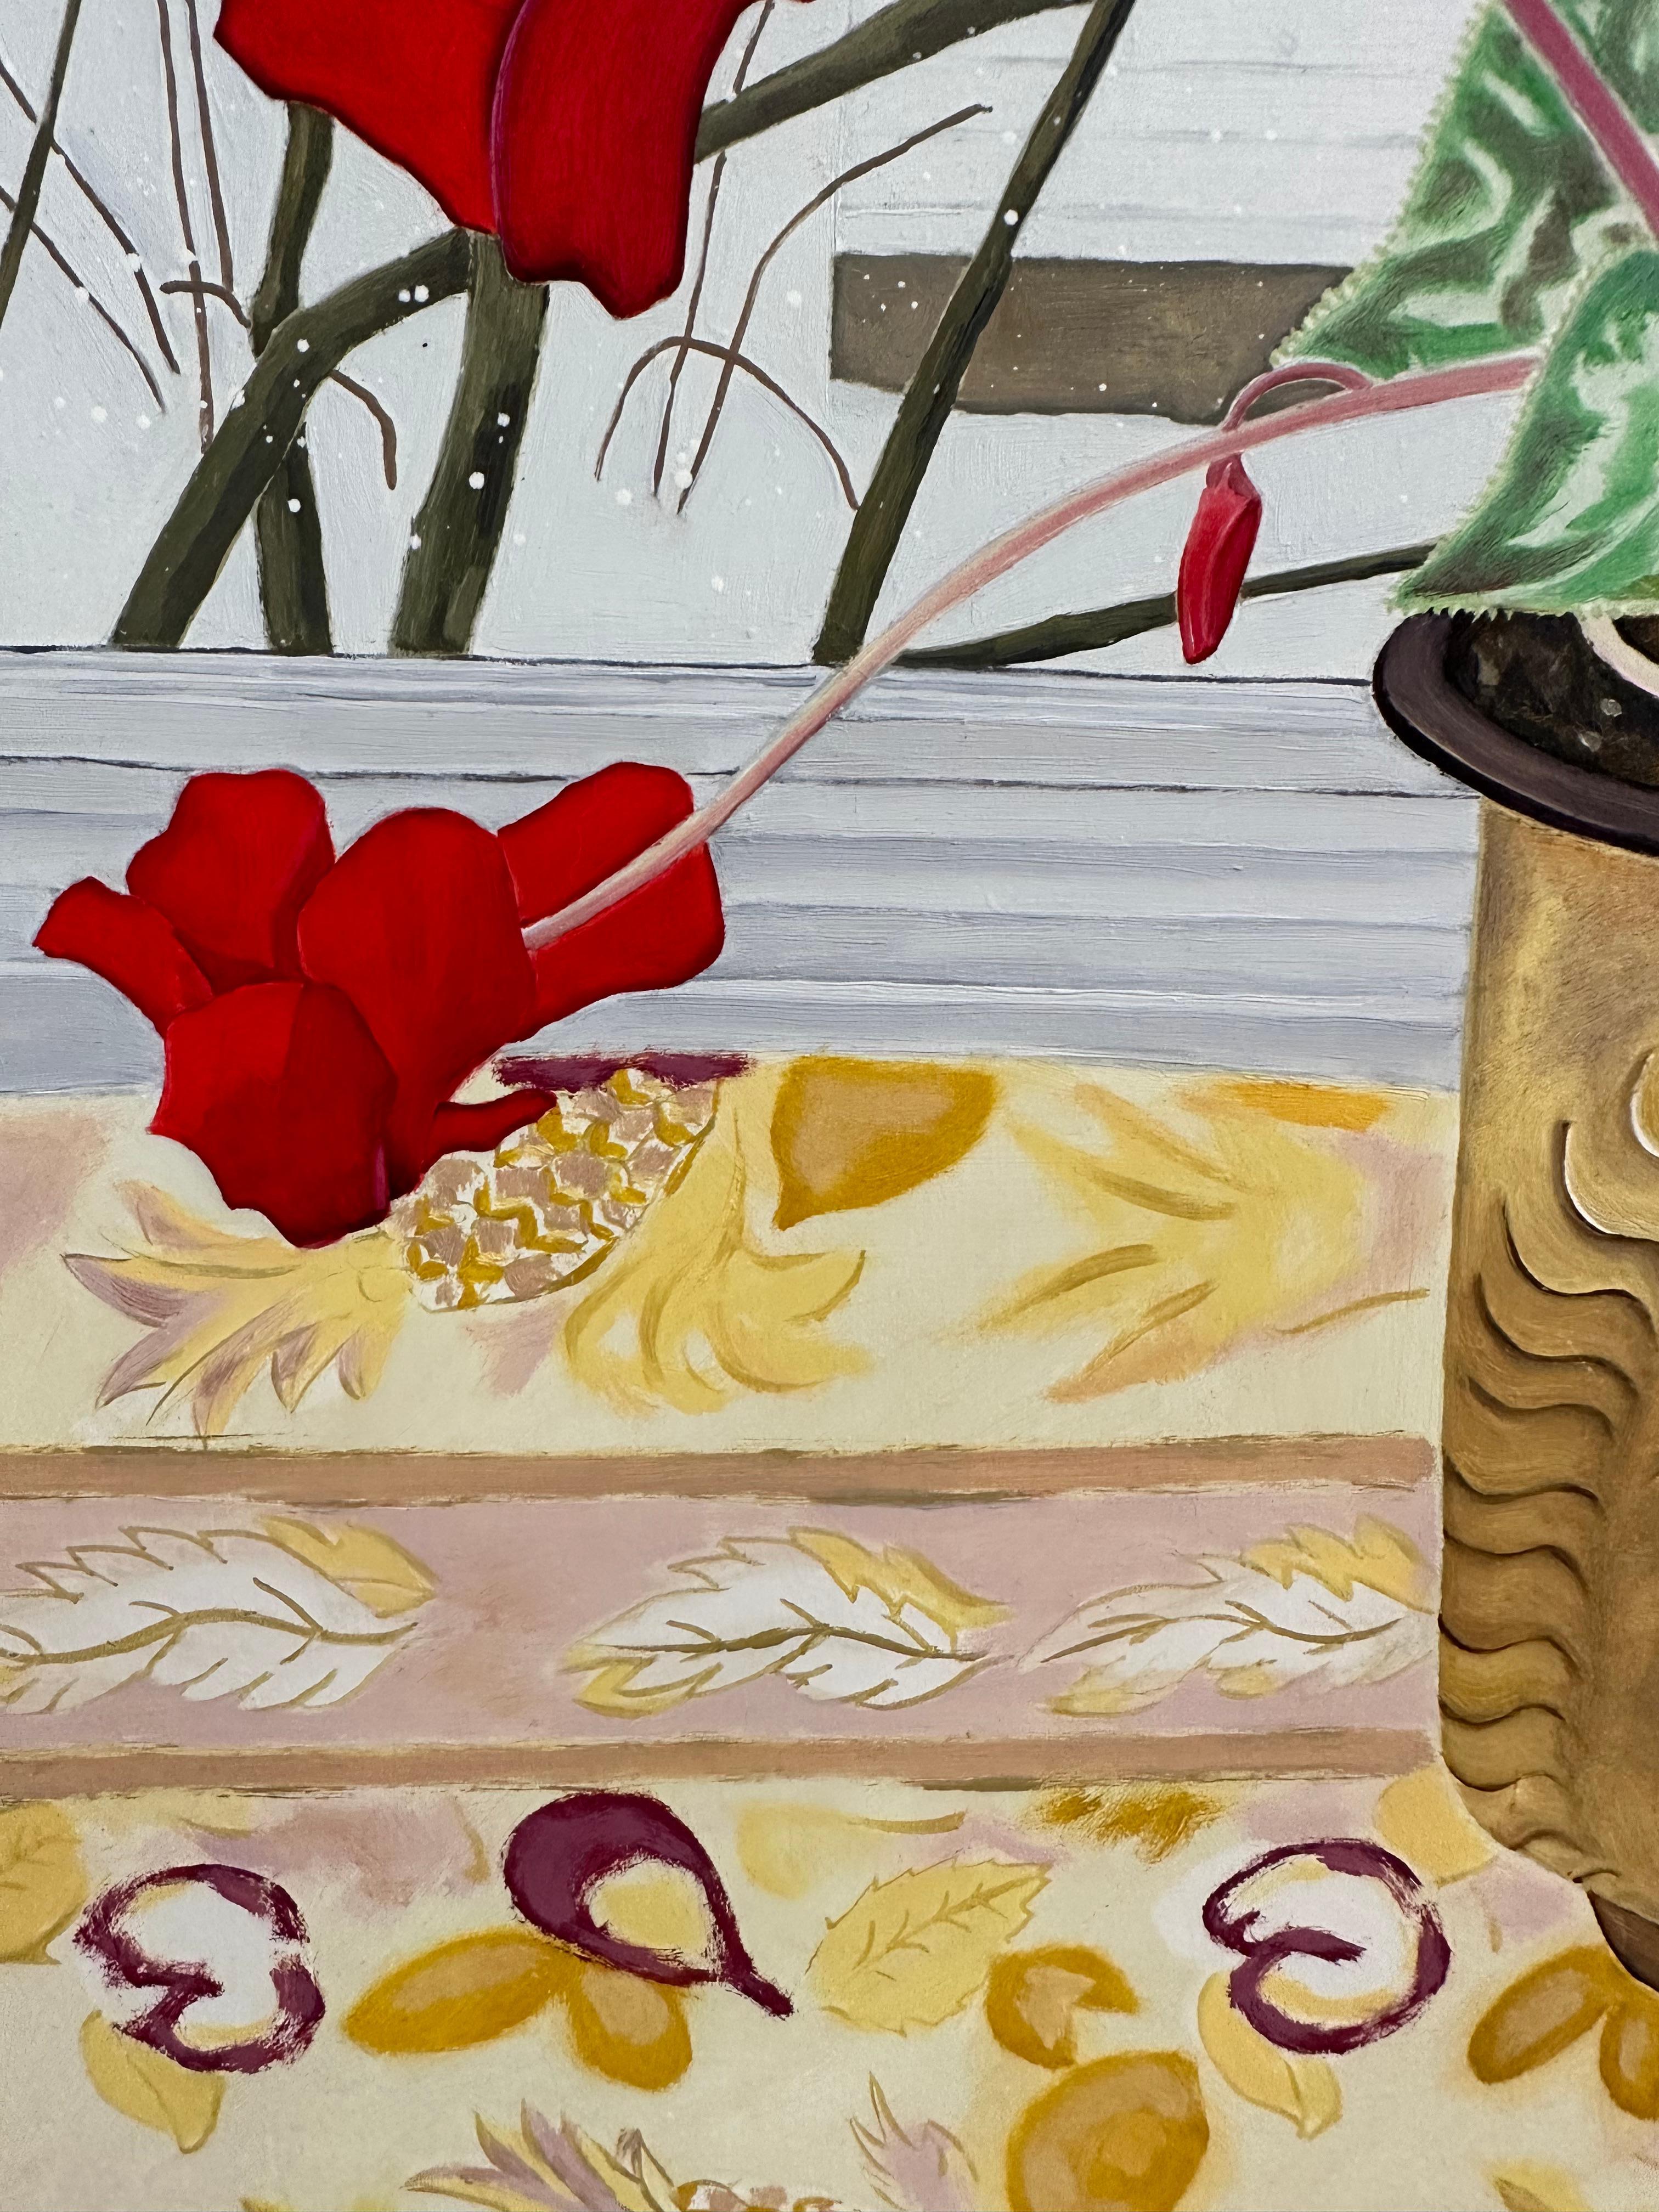 Crimson red flowers with dark green leaves in a golden planter with a face on the side sit on a patterned yellow tablecloth in front of a window. Through the window, a winter landscape with freshly falling snow and a white house can be seen outside.